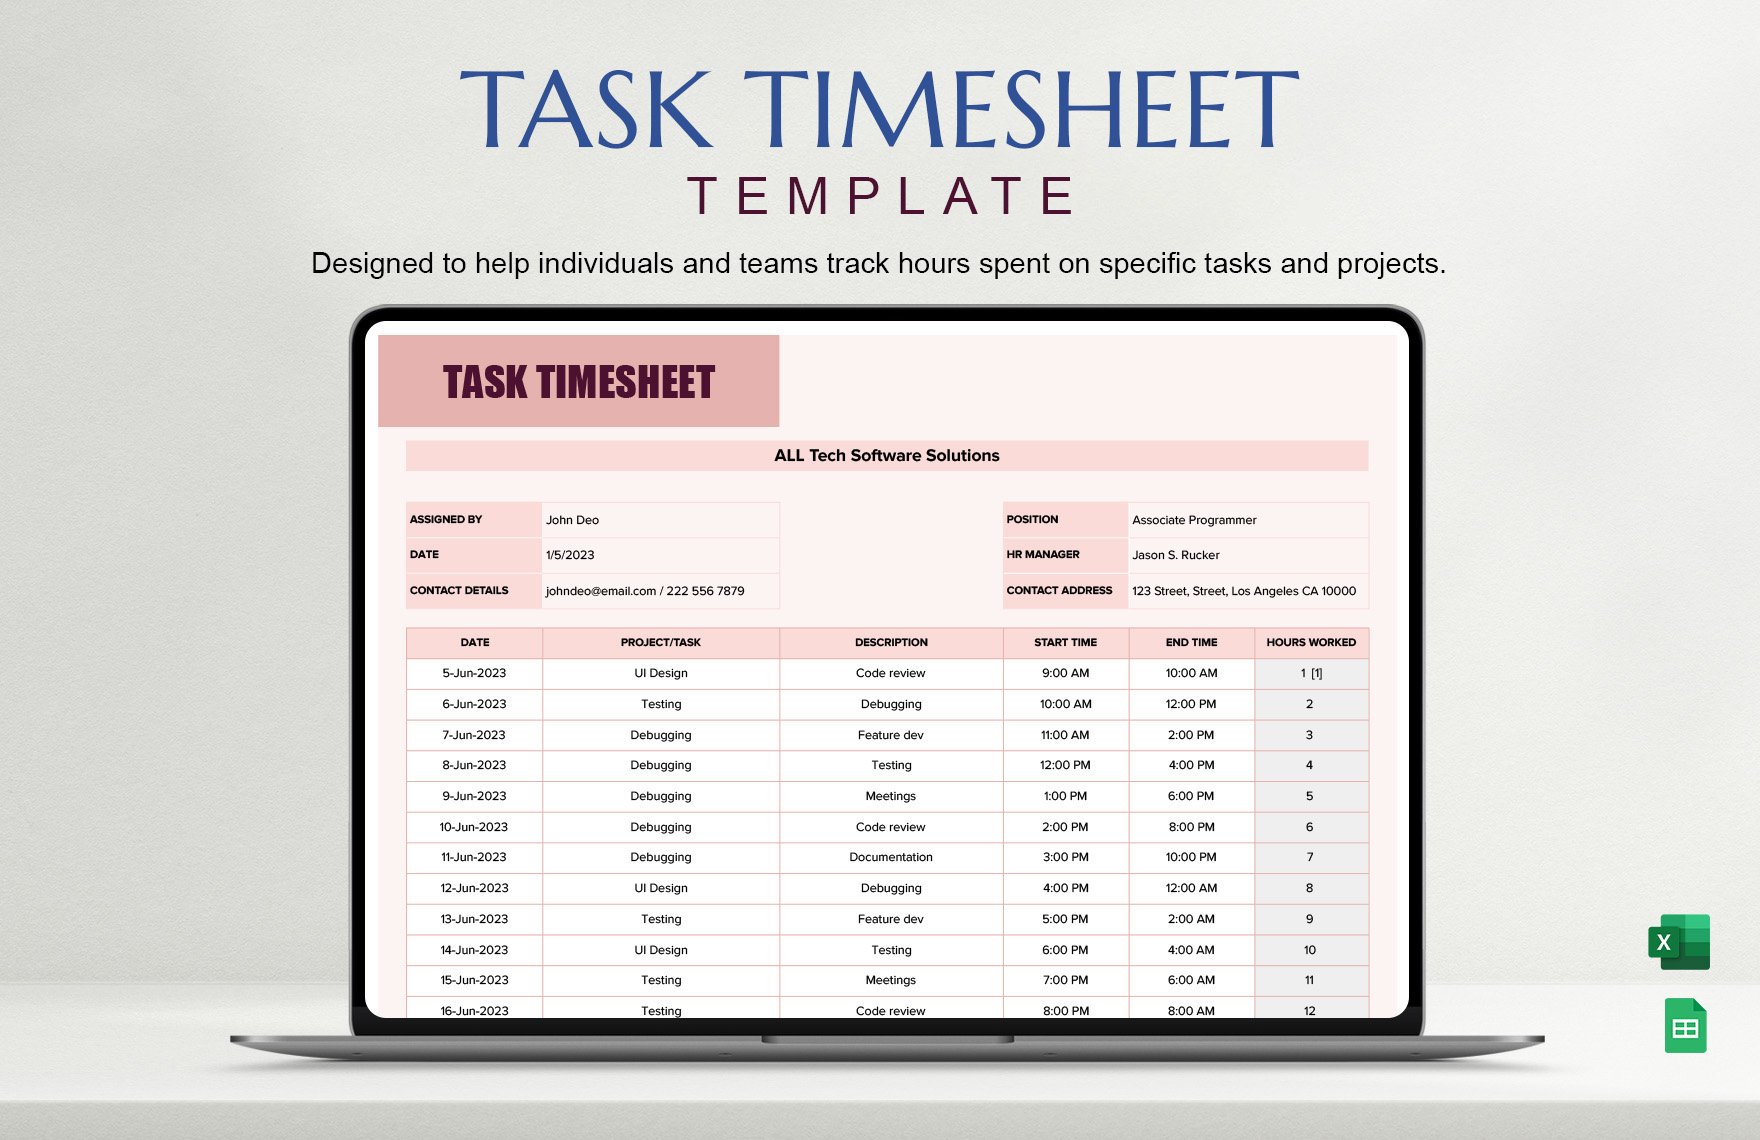 Free Task Timesheet Template in Excel, Google Sheets